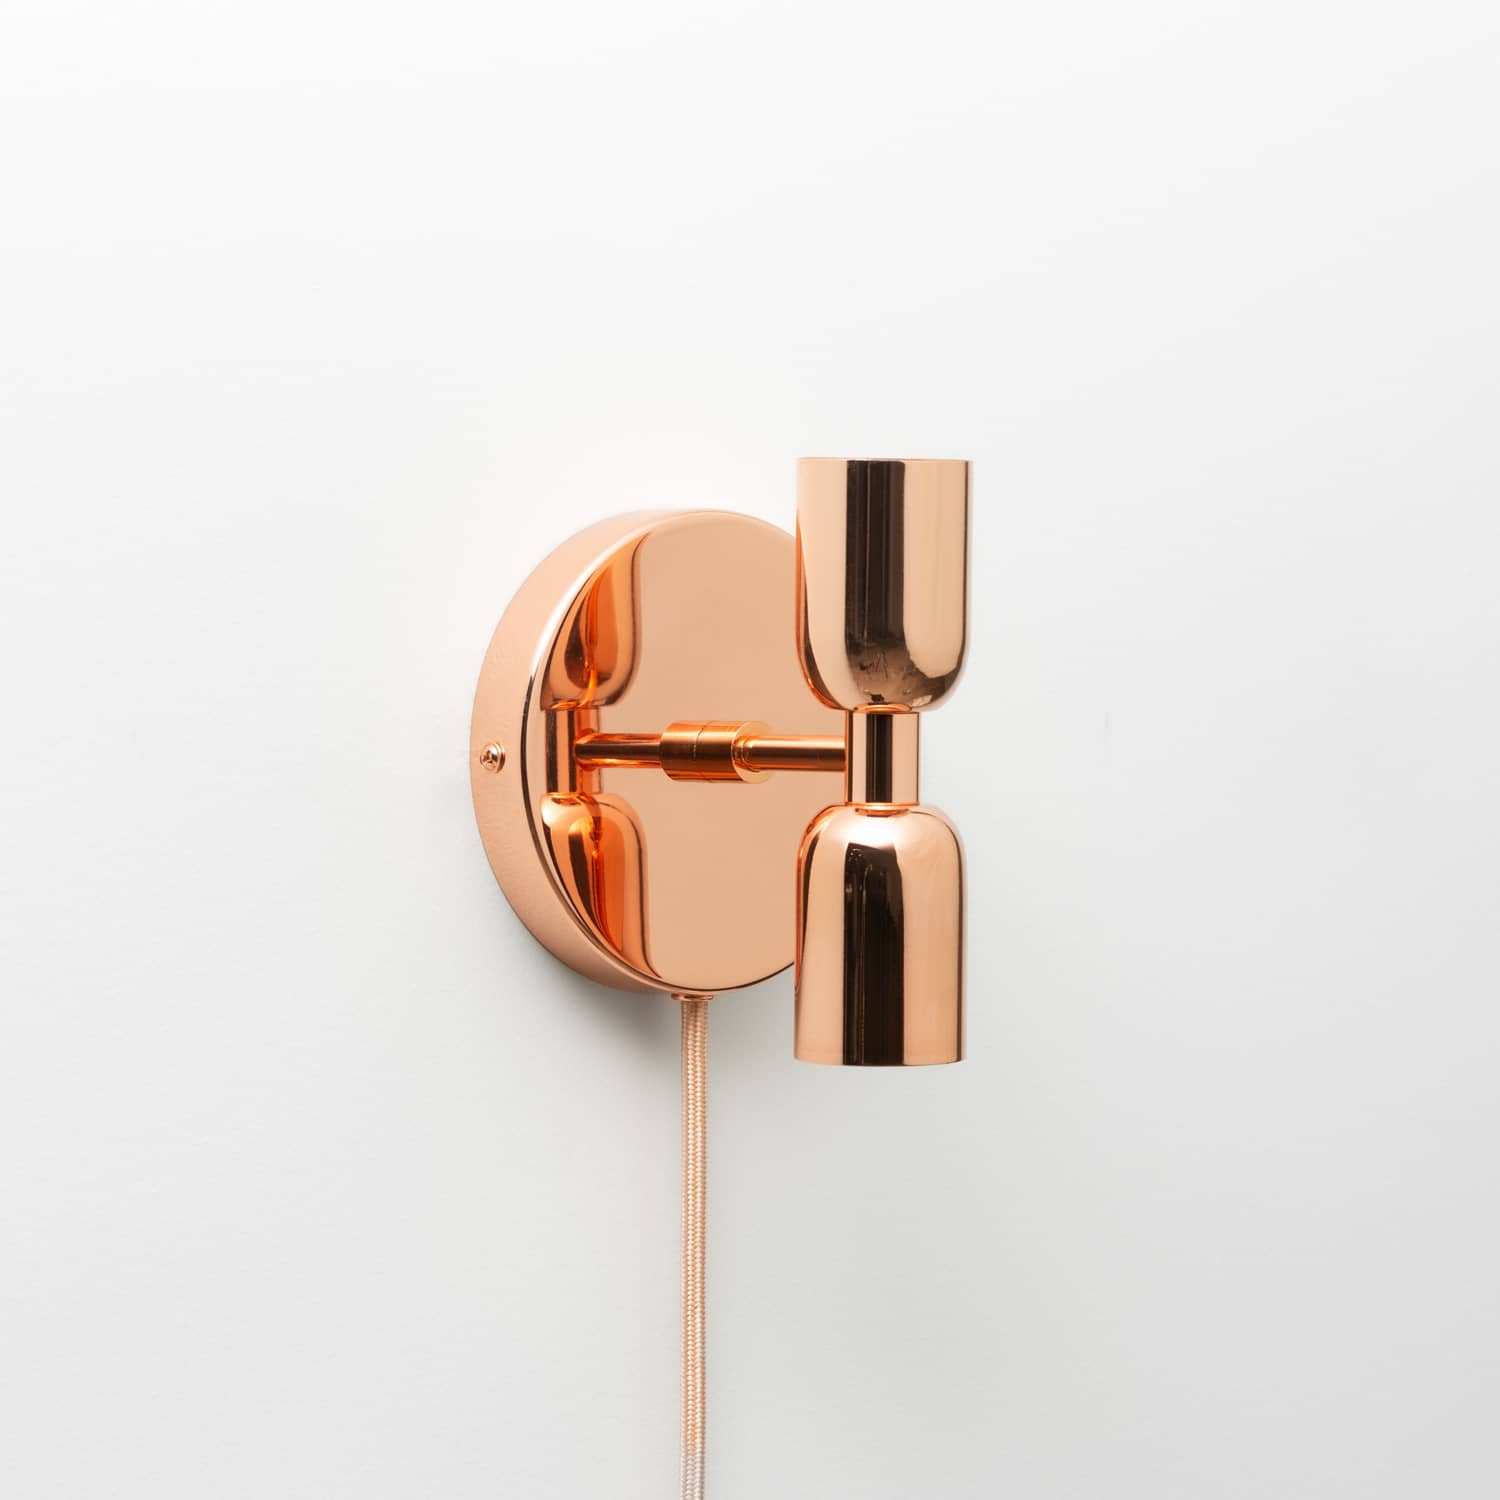 Junction Mini Duo Plug-In Sconce in Polished Copper finish